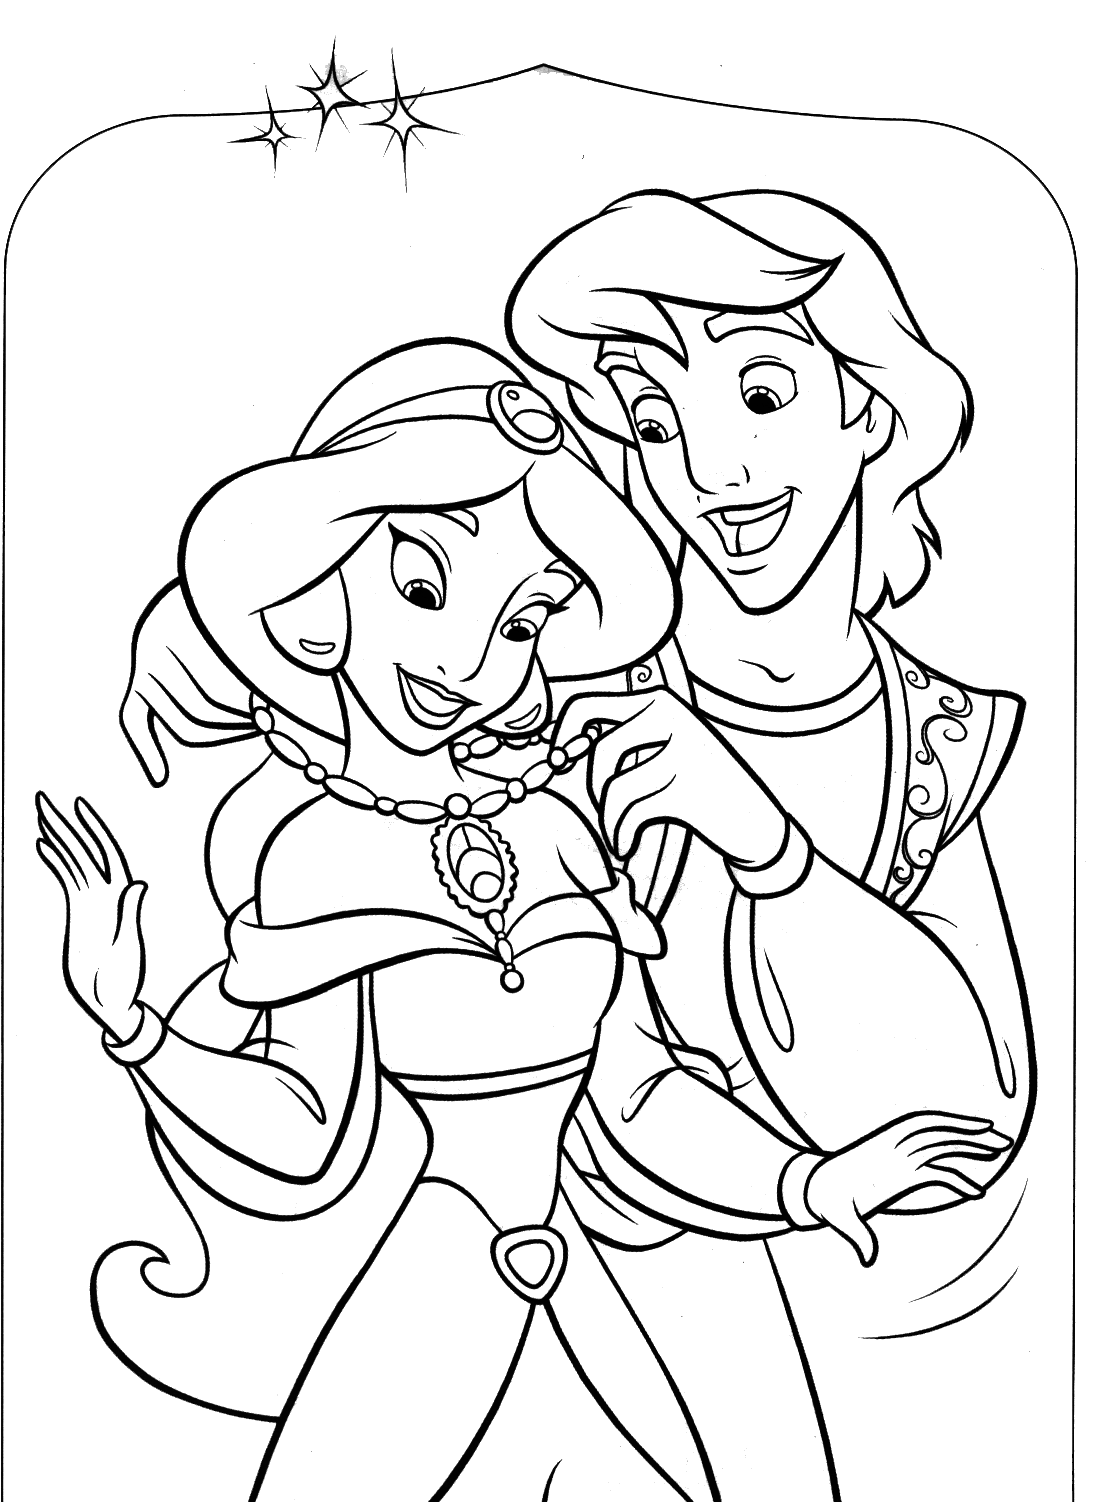 Download Jasmin - Free Colouring Pages